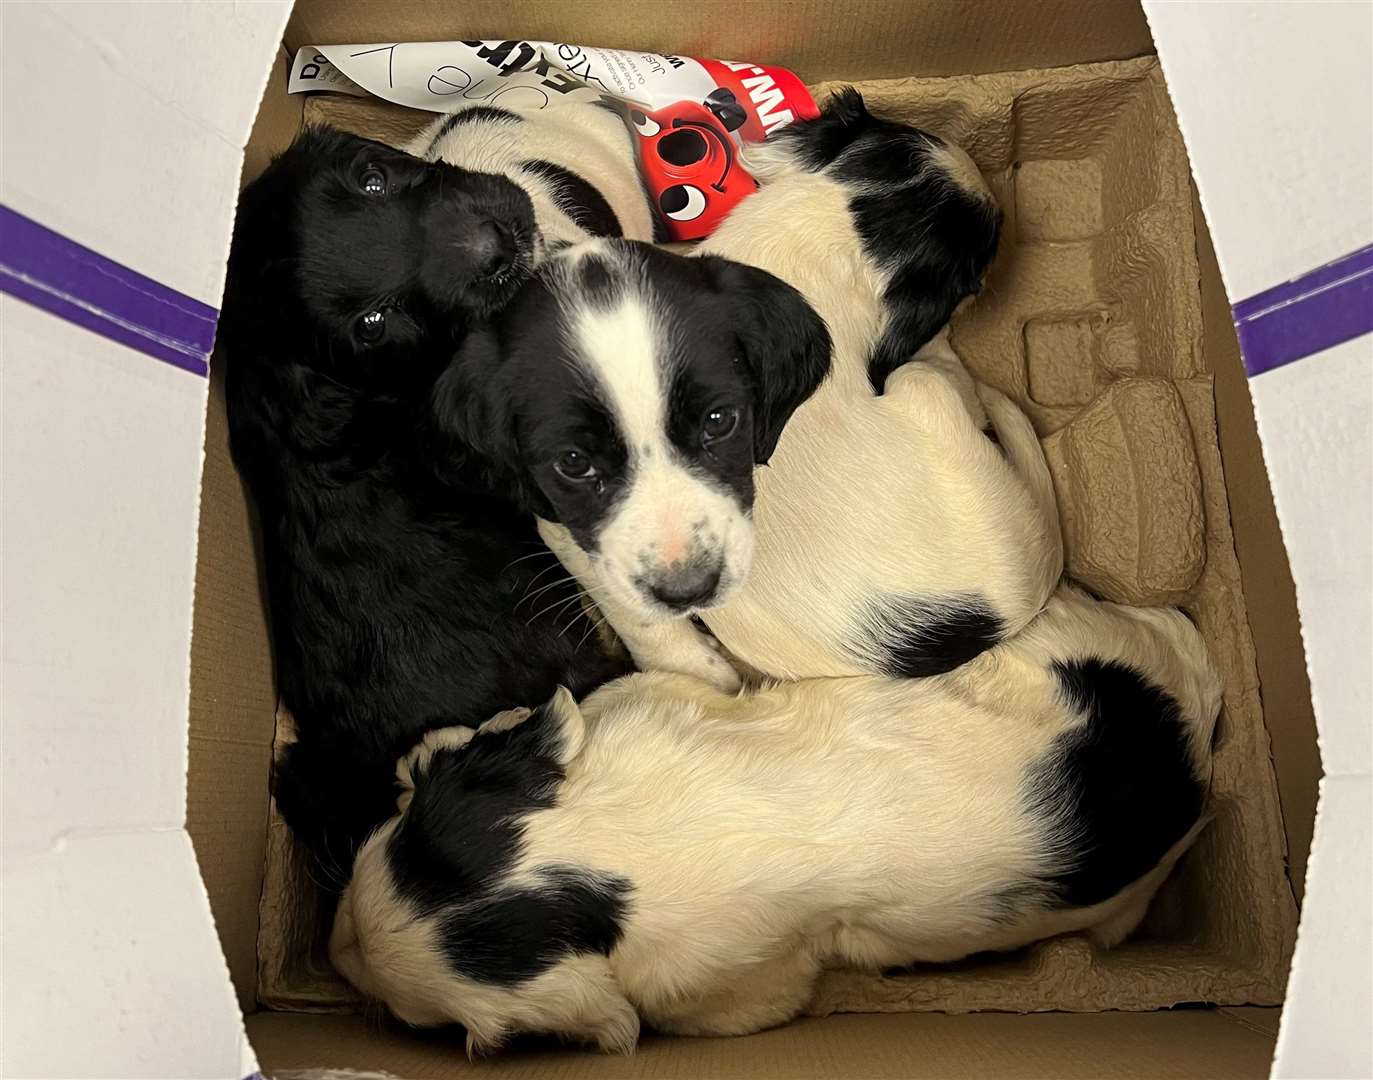 The puppies were handed over in a cardboard box. Picture: Medivet